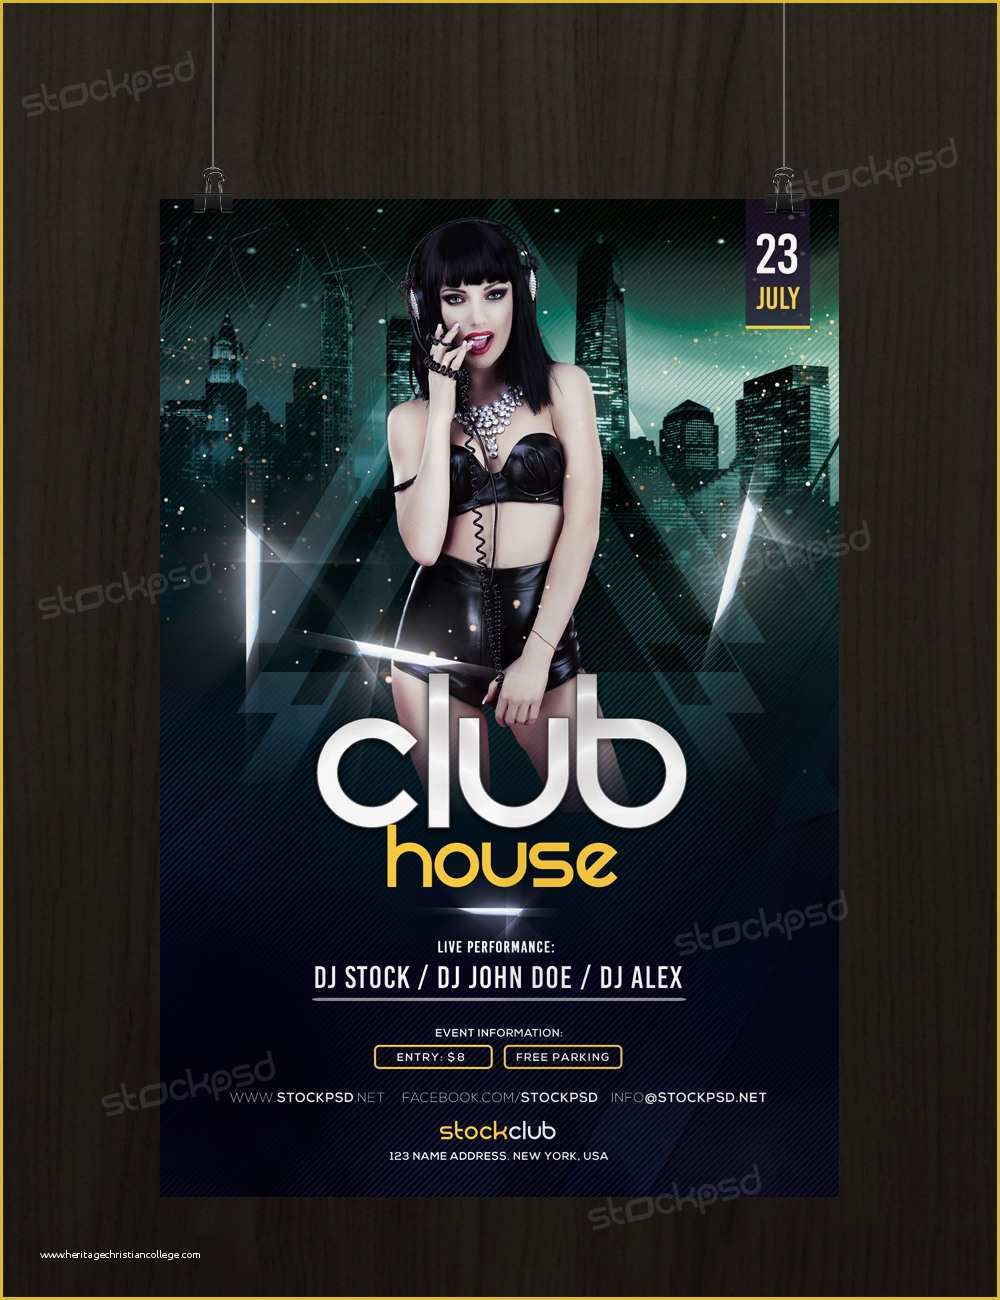 Free Photoshop Flyer Templates Of Get Free Club House Flyer Template Shop